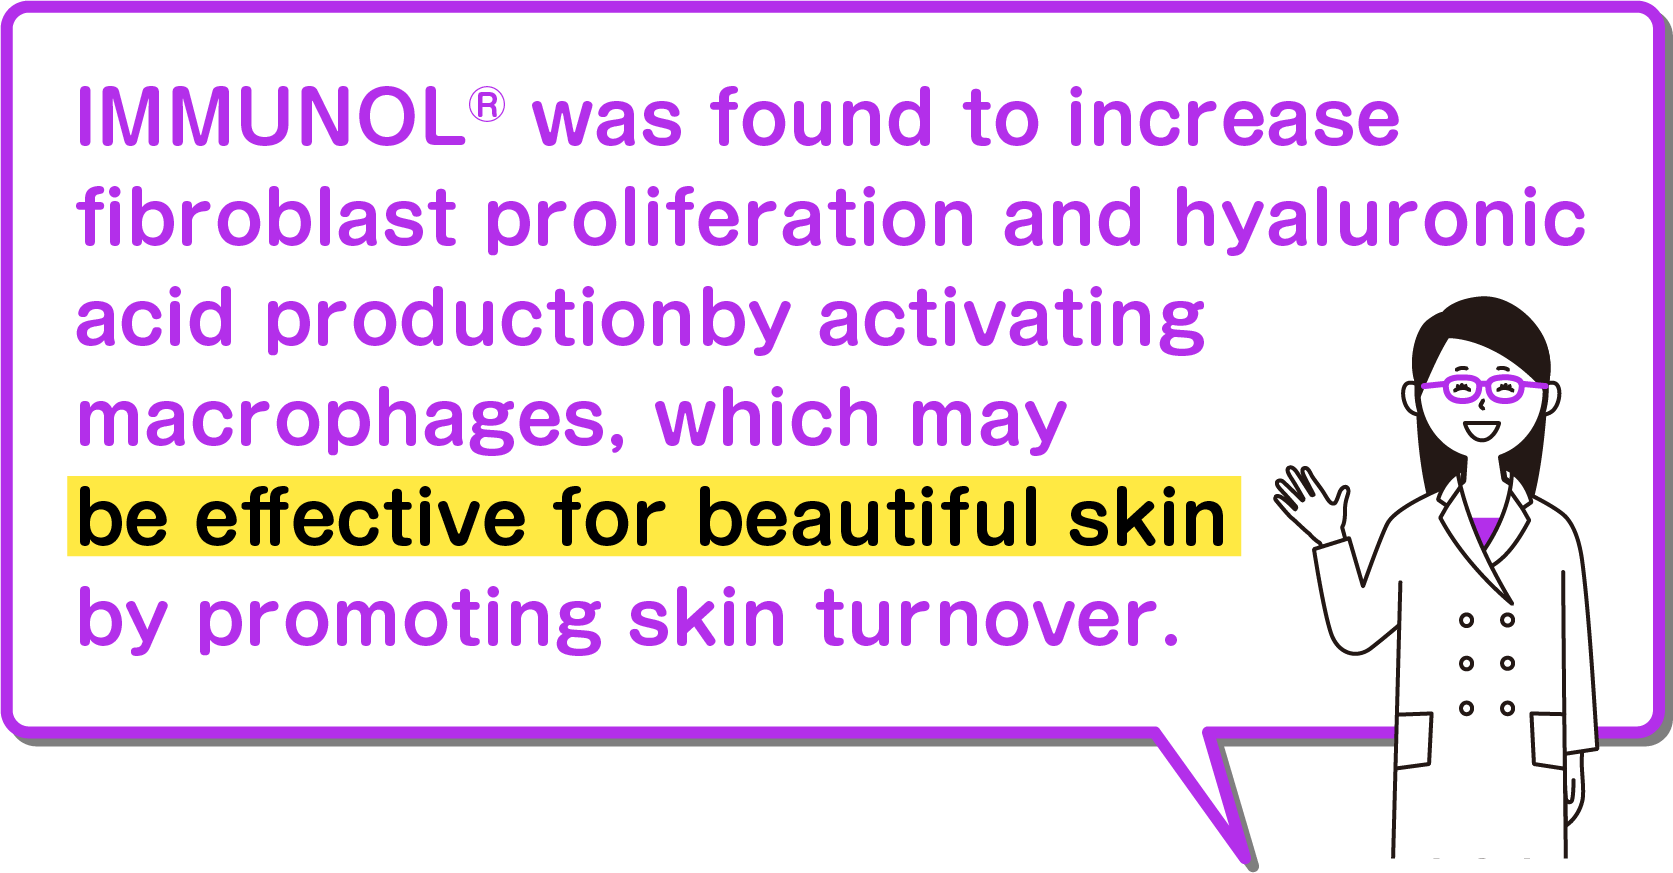 IMMUNOL® was found to increase fibroblast proliferation and hyaluronic acid production by activating macrophages, which may be effective for beautiful skin by promoting skin turnover.